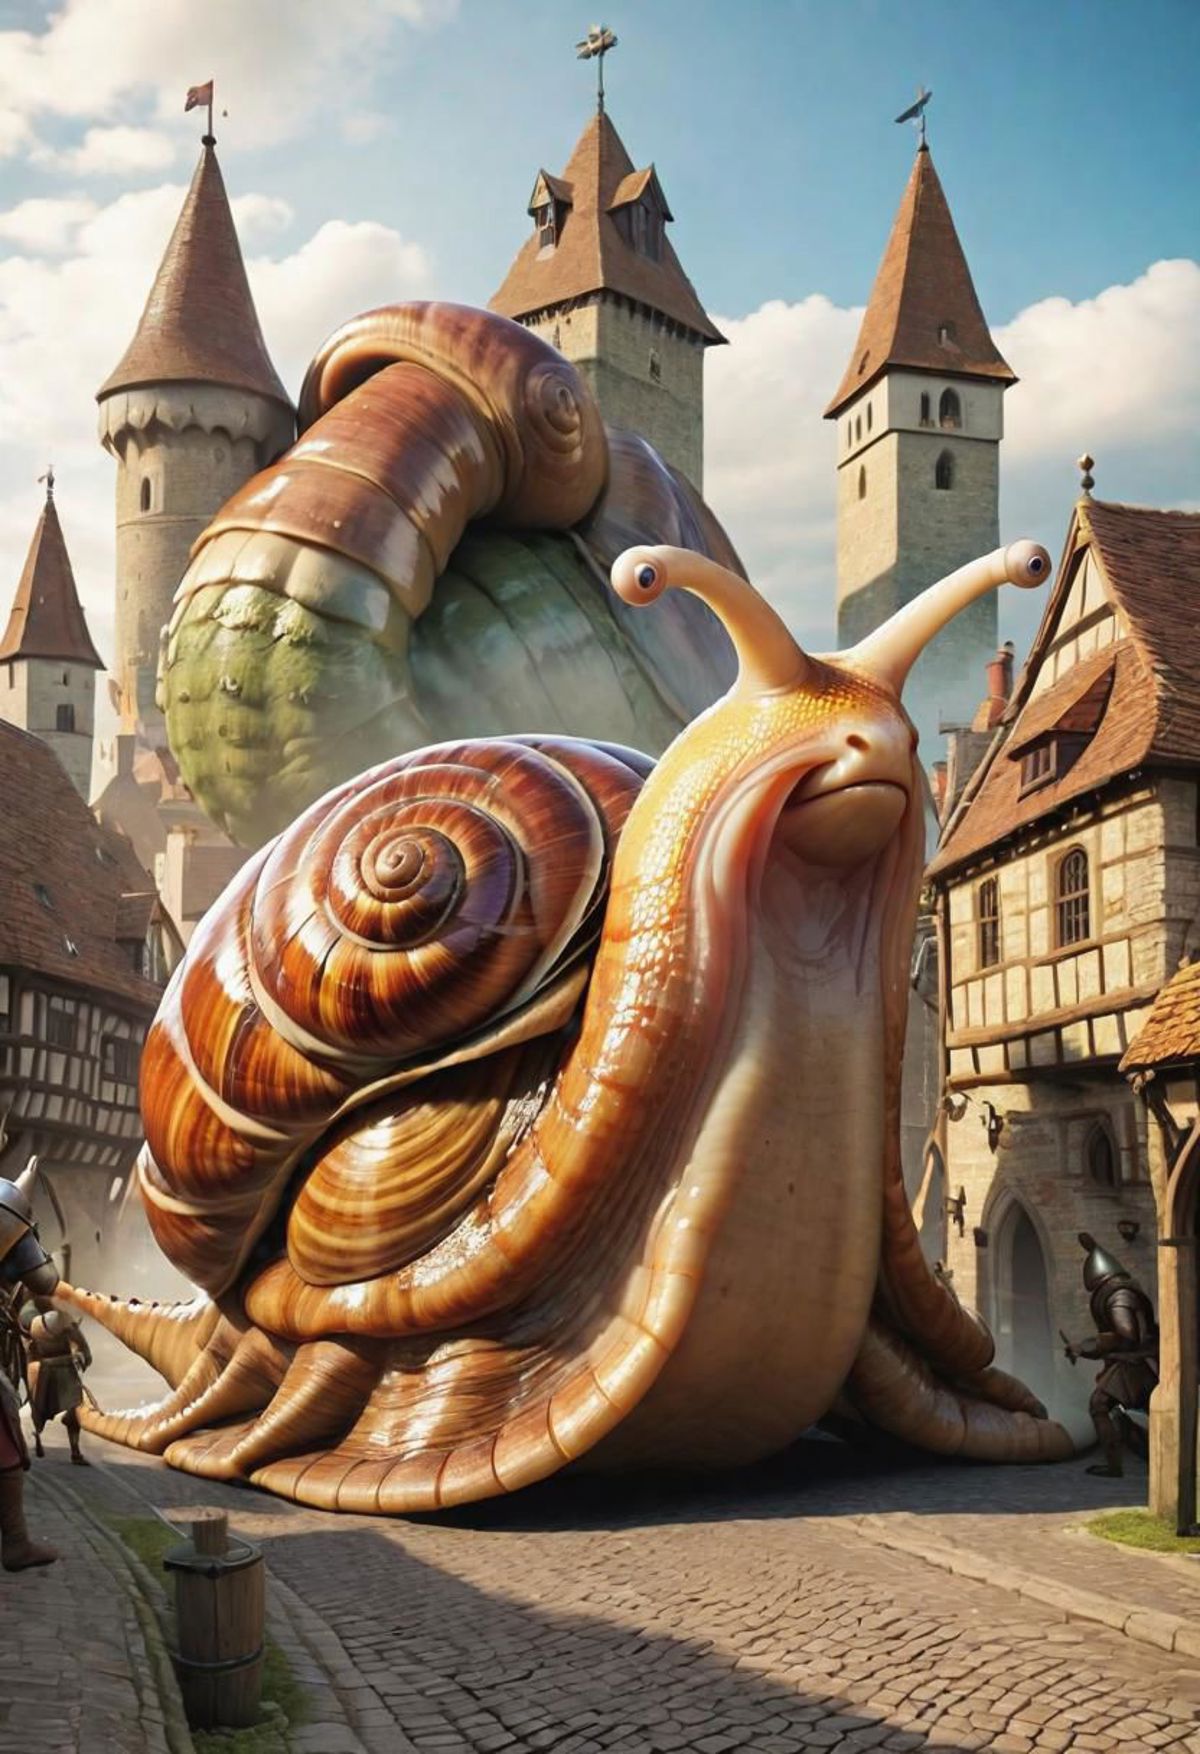 A large, colorful, cartoon-like snail is walking down a street in a medieval town.